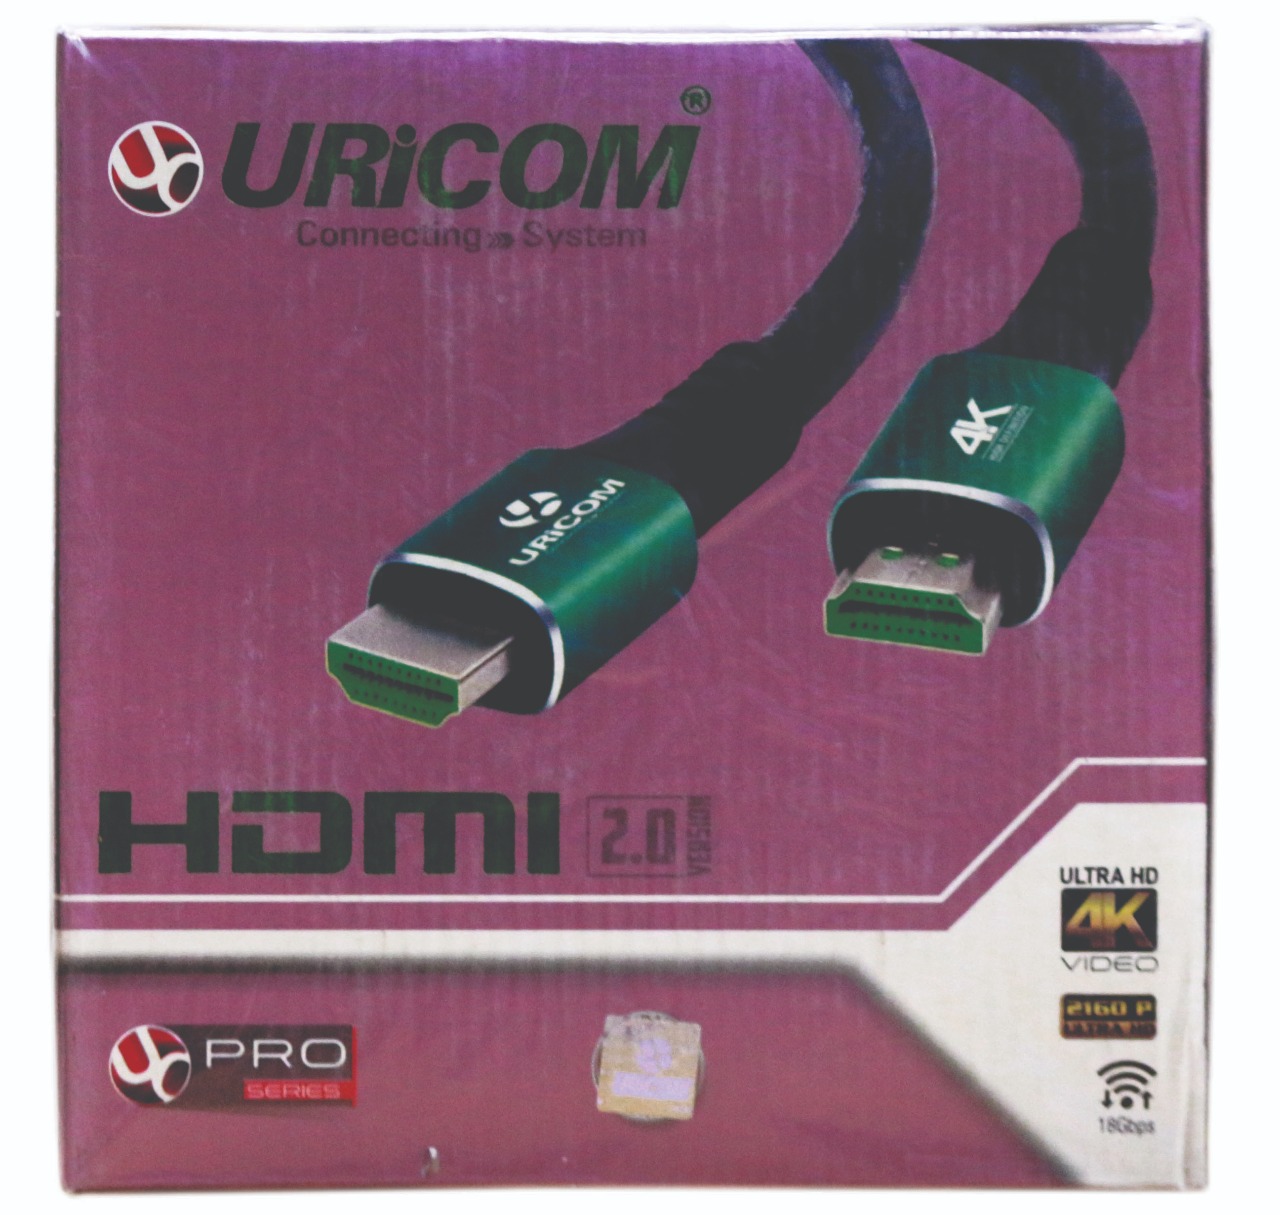 URICOM HDMI CABLE 20M 4K 60HZ 1080P WITH ETHERNET 18GB/S SPEED